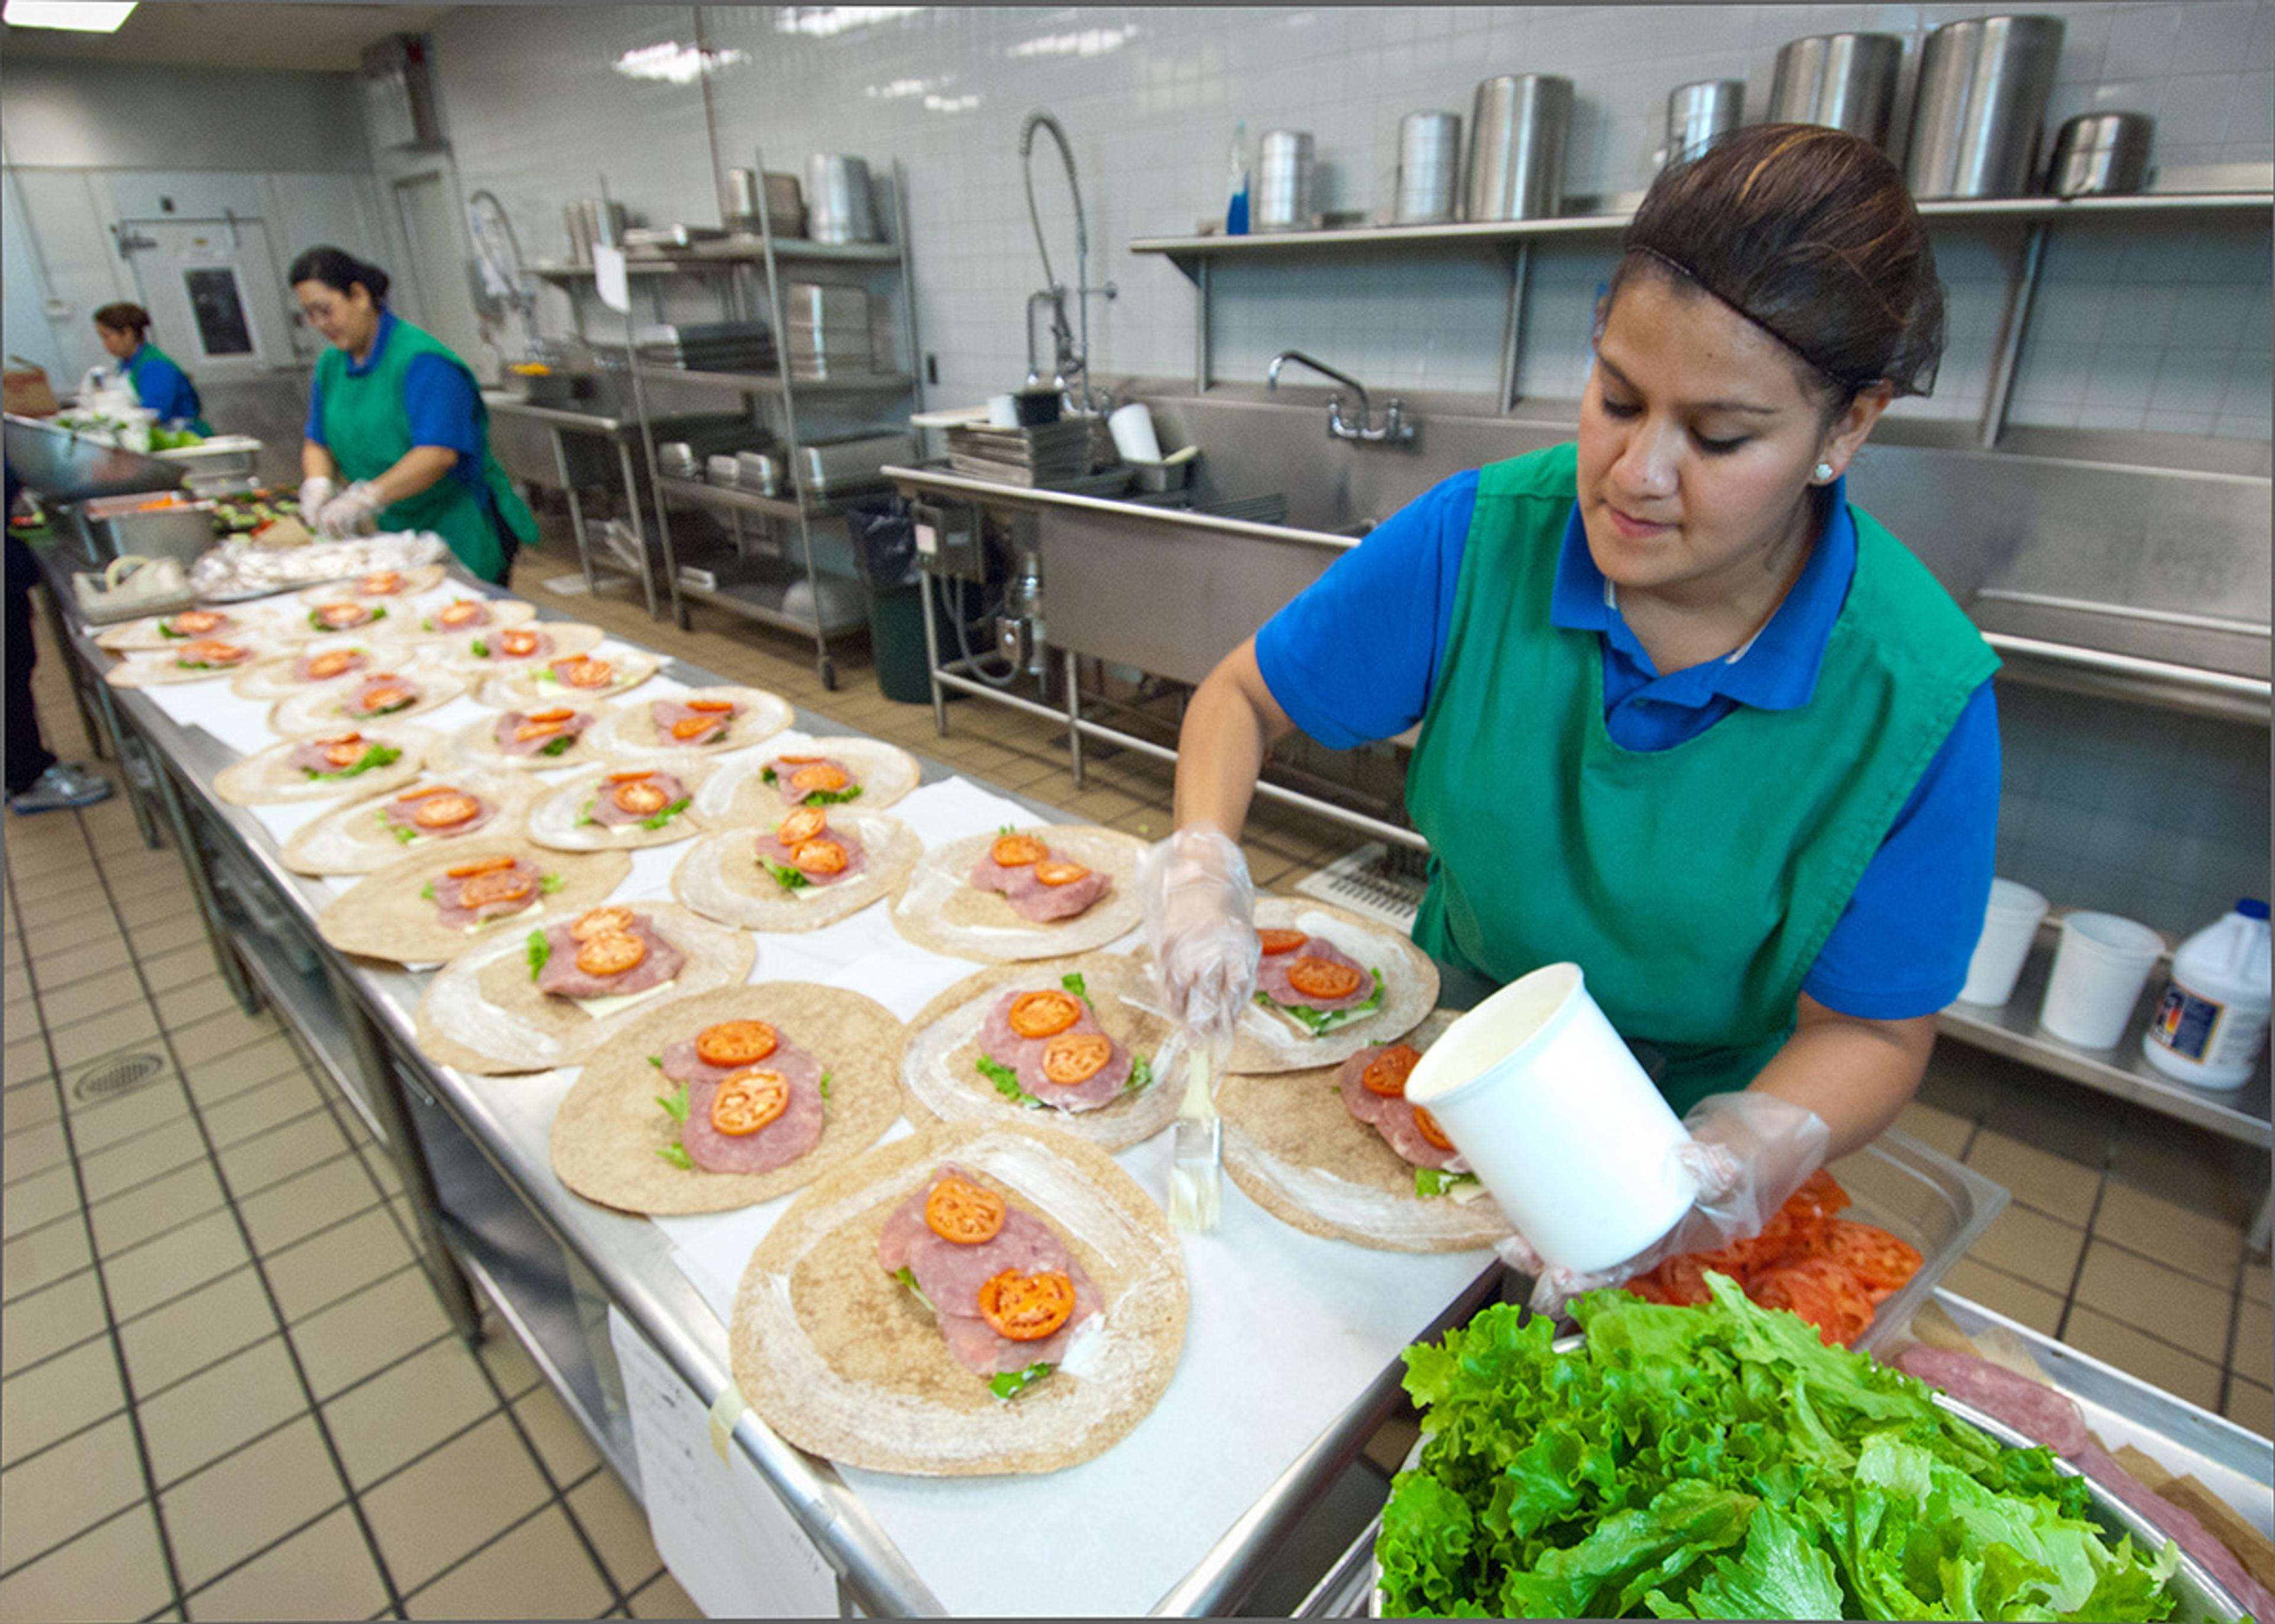 A school lunchroom cook spreads mayo onto meat and veggie wraps that she's preparing in the school kitchen.